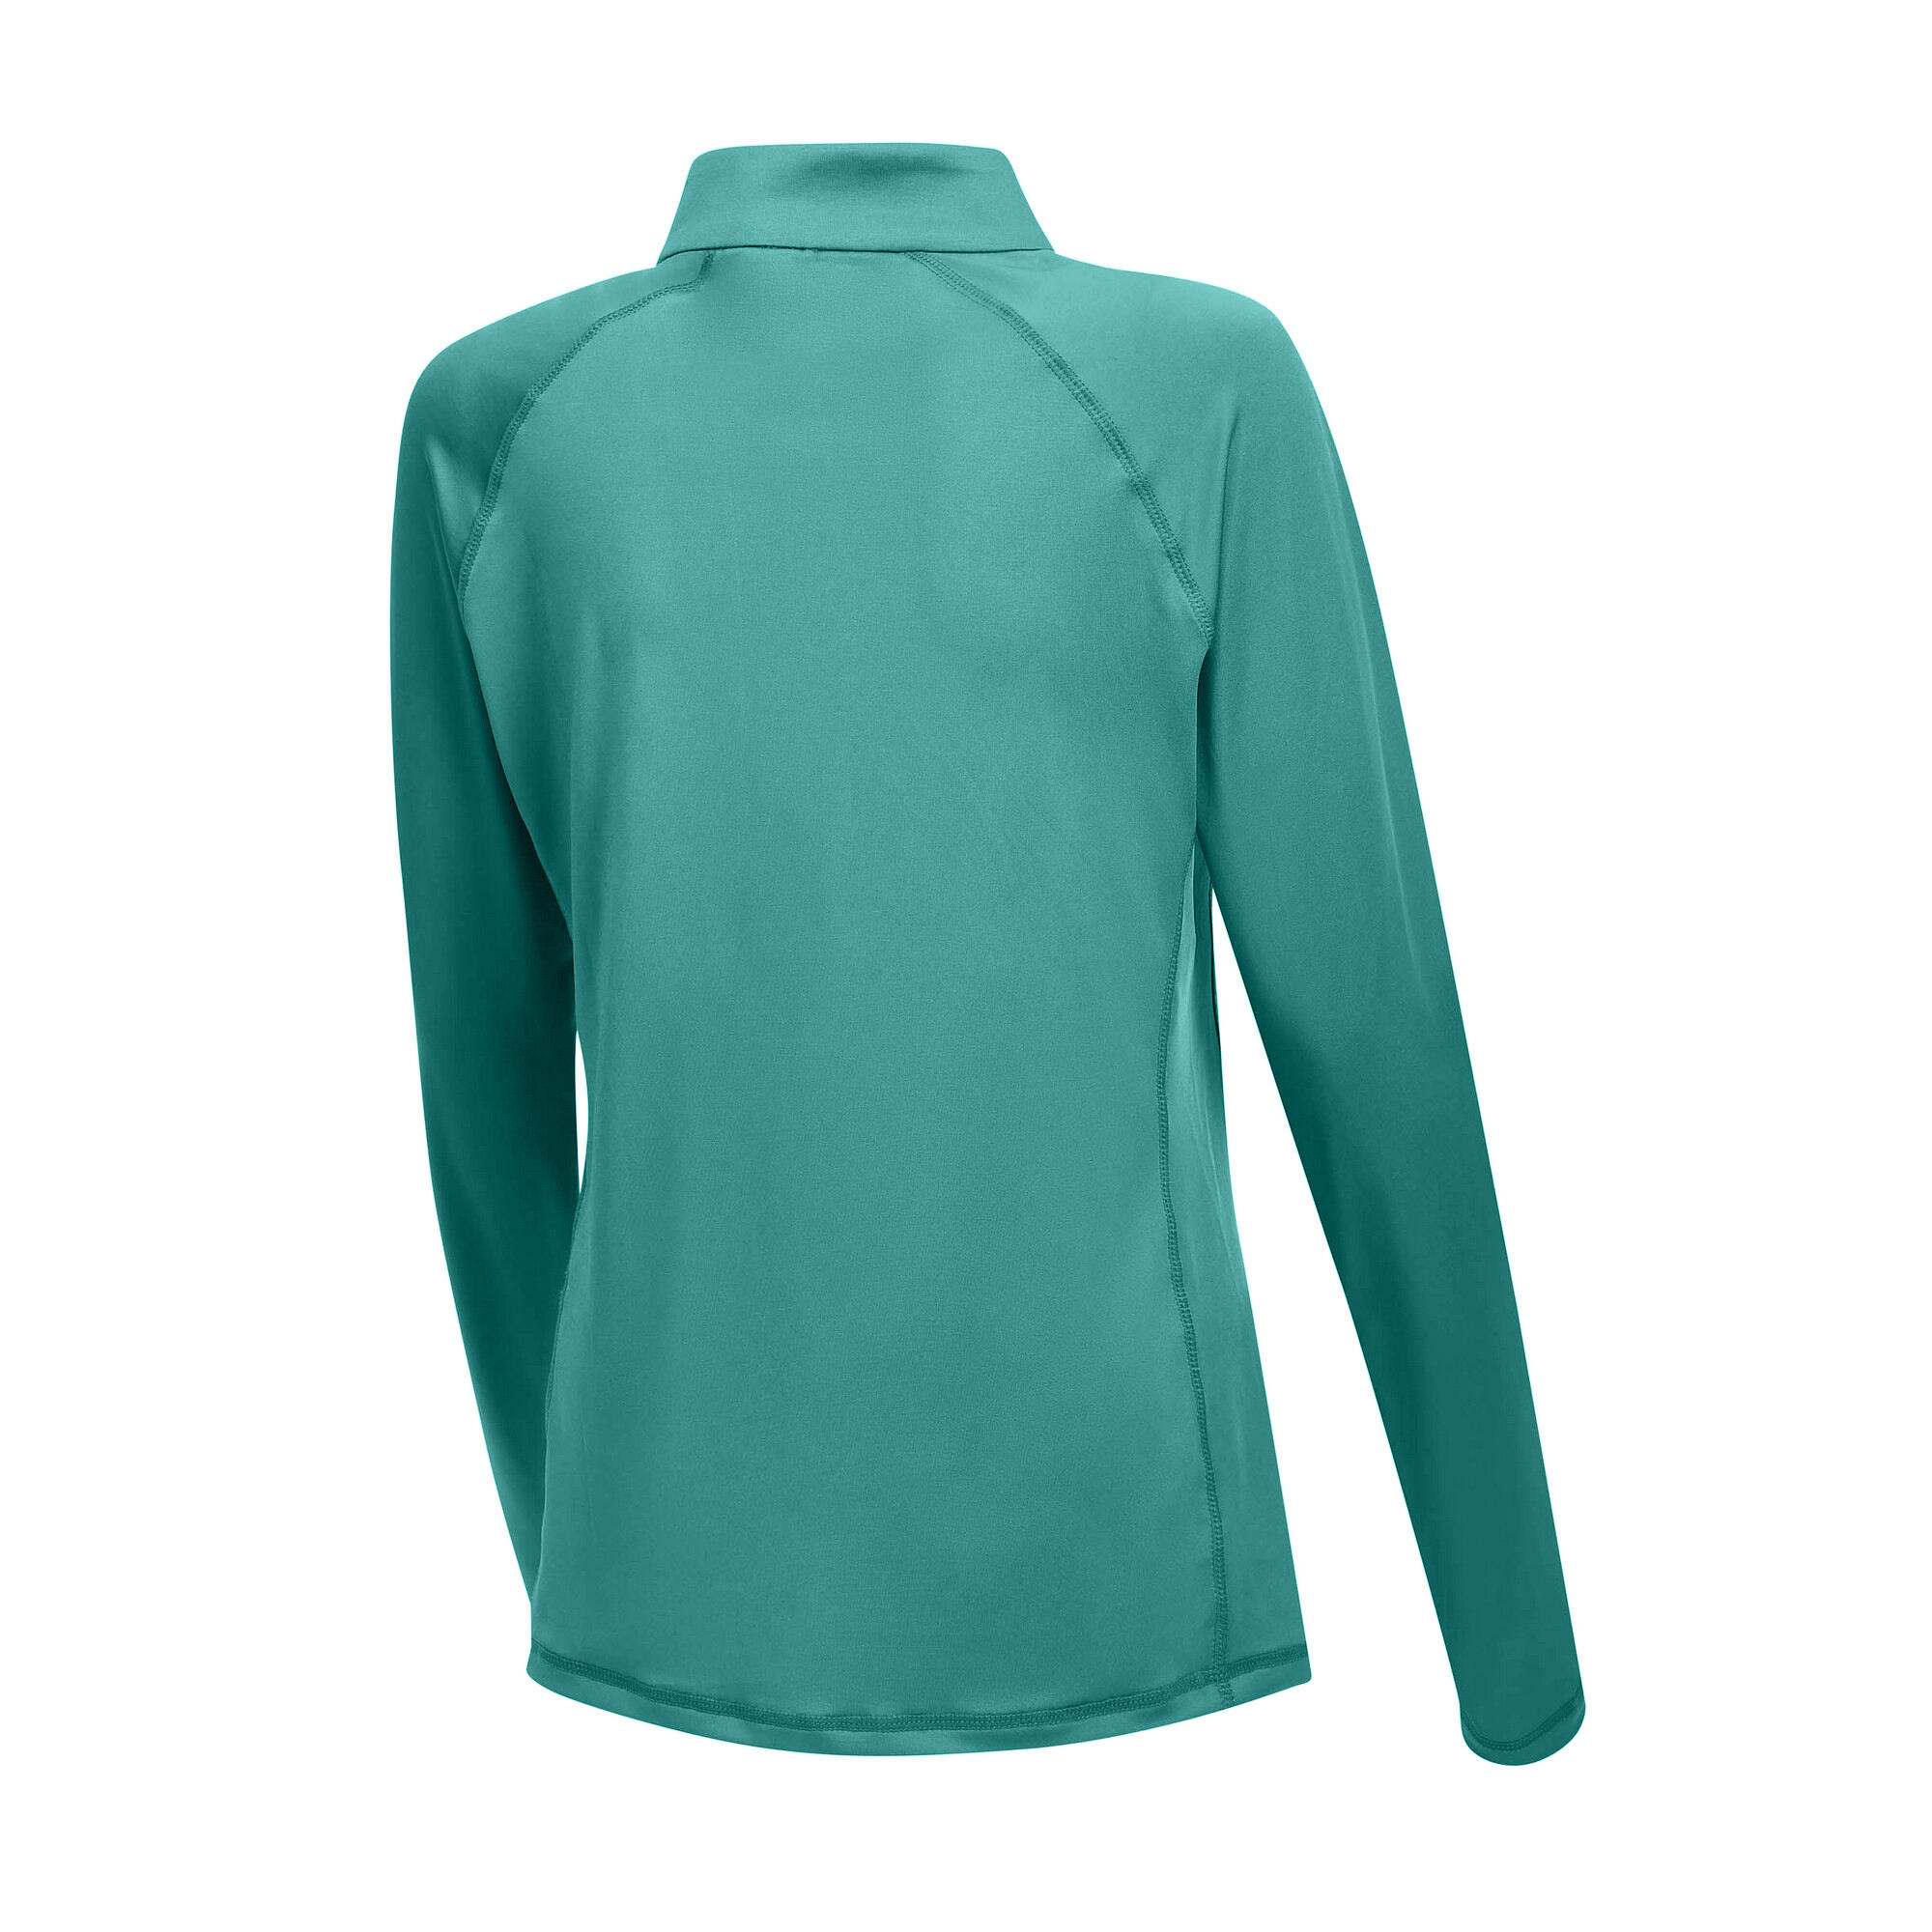 Womens/Ladies Prime LongSleeved Base Layer Top (Turquoise) 2/3